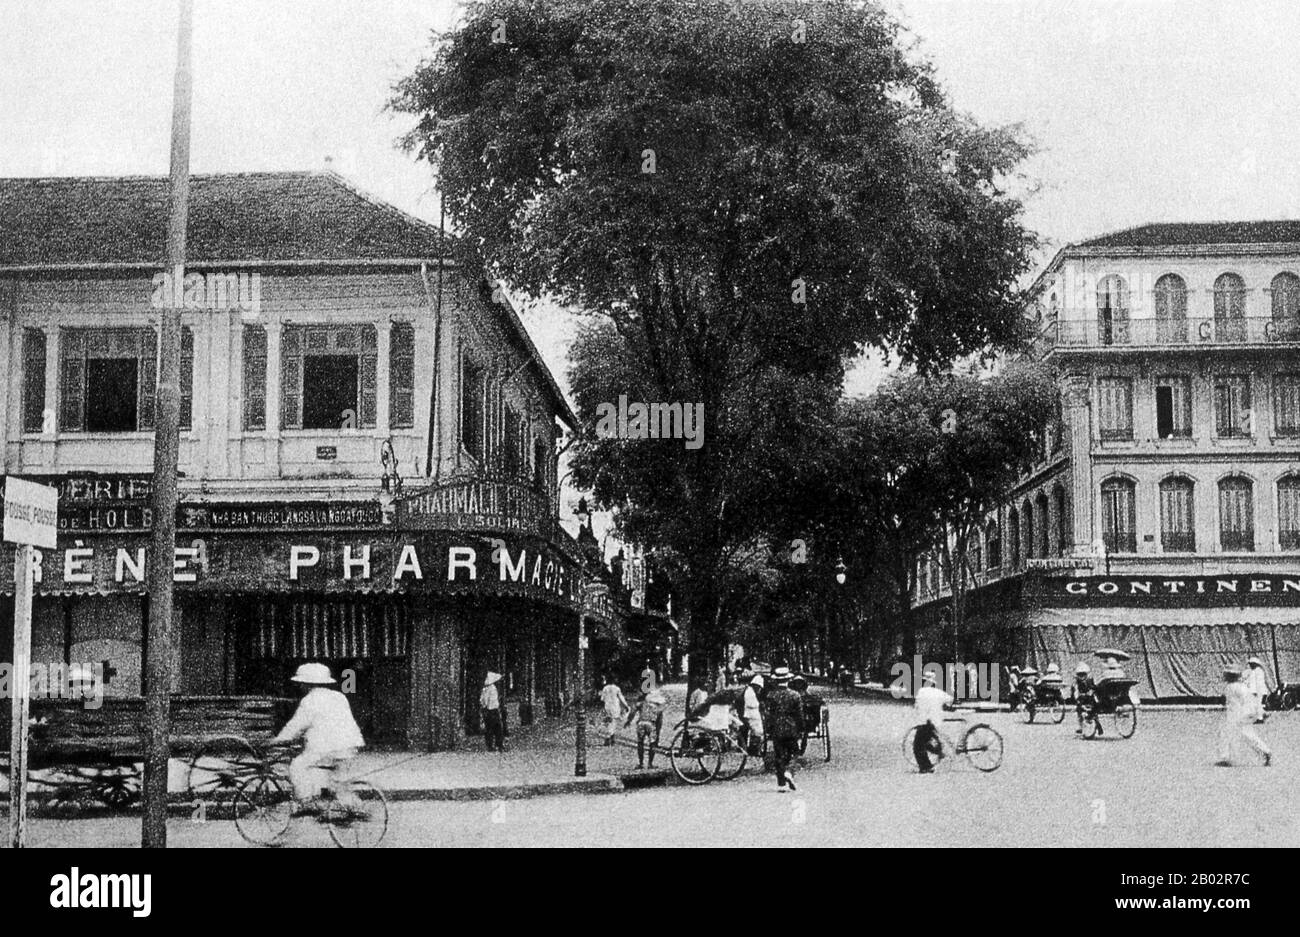 The rue Catinat (Catinat street) is a street, now called Dong Khoi, in Ho Chi Minh City, the former Saigon. It was named for Nicolas Catinat, a 17th and 18th century French marshal.  Former Emperor Bảo Đại made Saigon the capital of the State of Vietnam in 1949 with himself as head of state. After the Việt Minh gained control of North Vietnam in 1954, it became common to refer to the Saigon government as 'South Vietnam'.  The government was renamed the Republic of Vietnam when Bảo Đại was deposed by his Prime Minister Ngo Dinh Diem in a fraudulent referendum in 1955. Saigon and Cholon, an adja Stock Photo